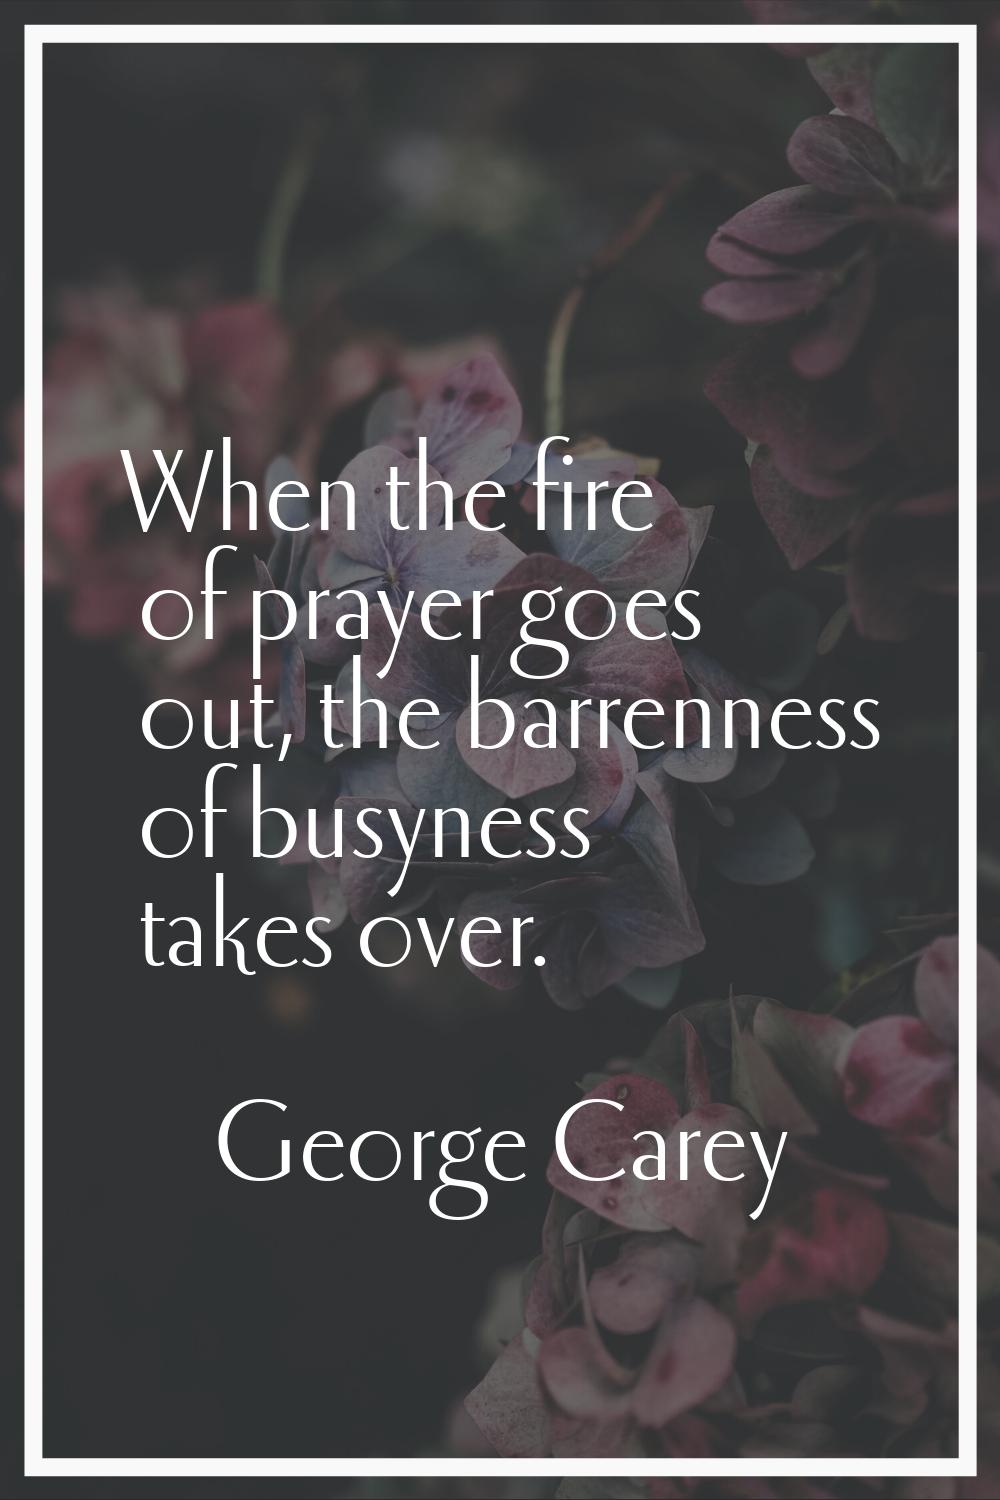 When the fire of prayer goes out, the barrenness of busyness takes over.